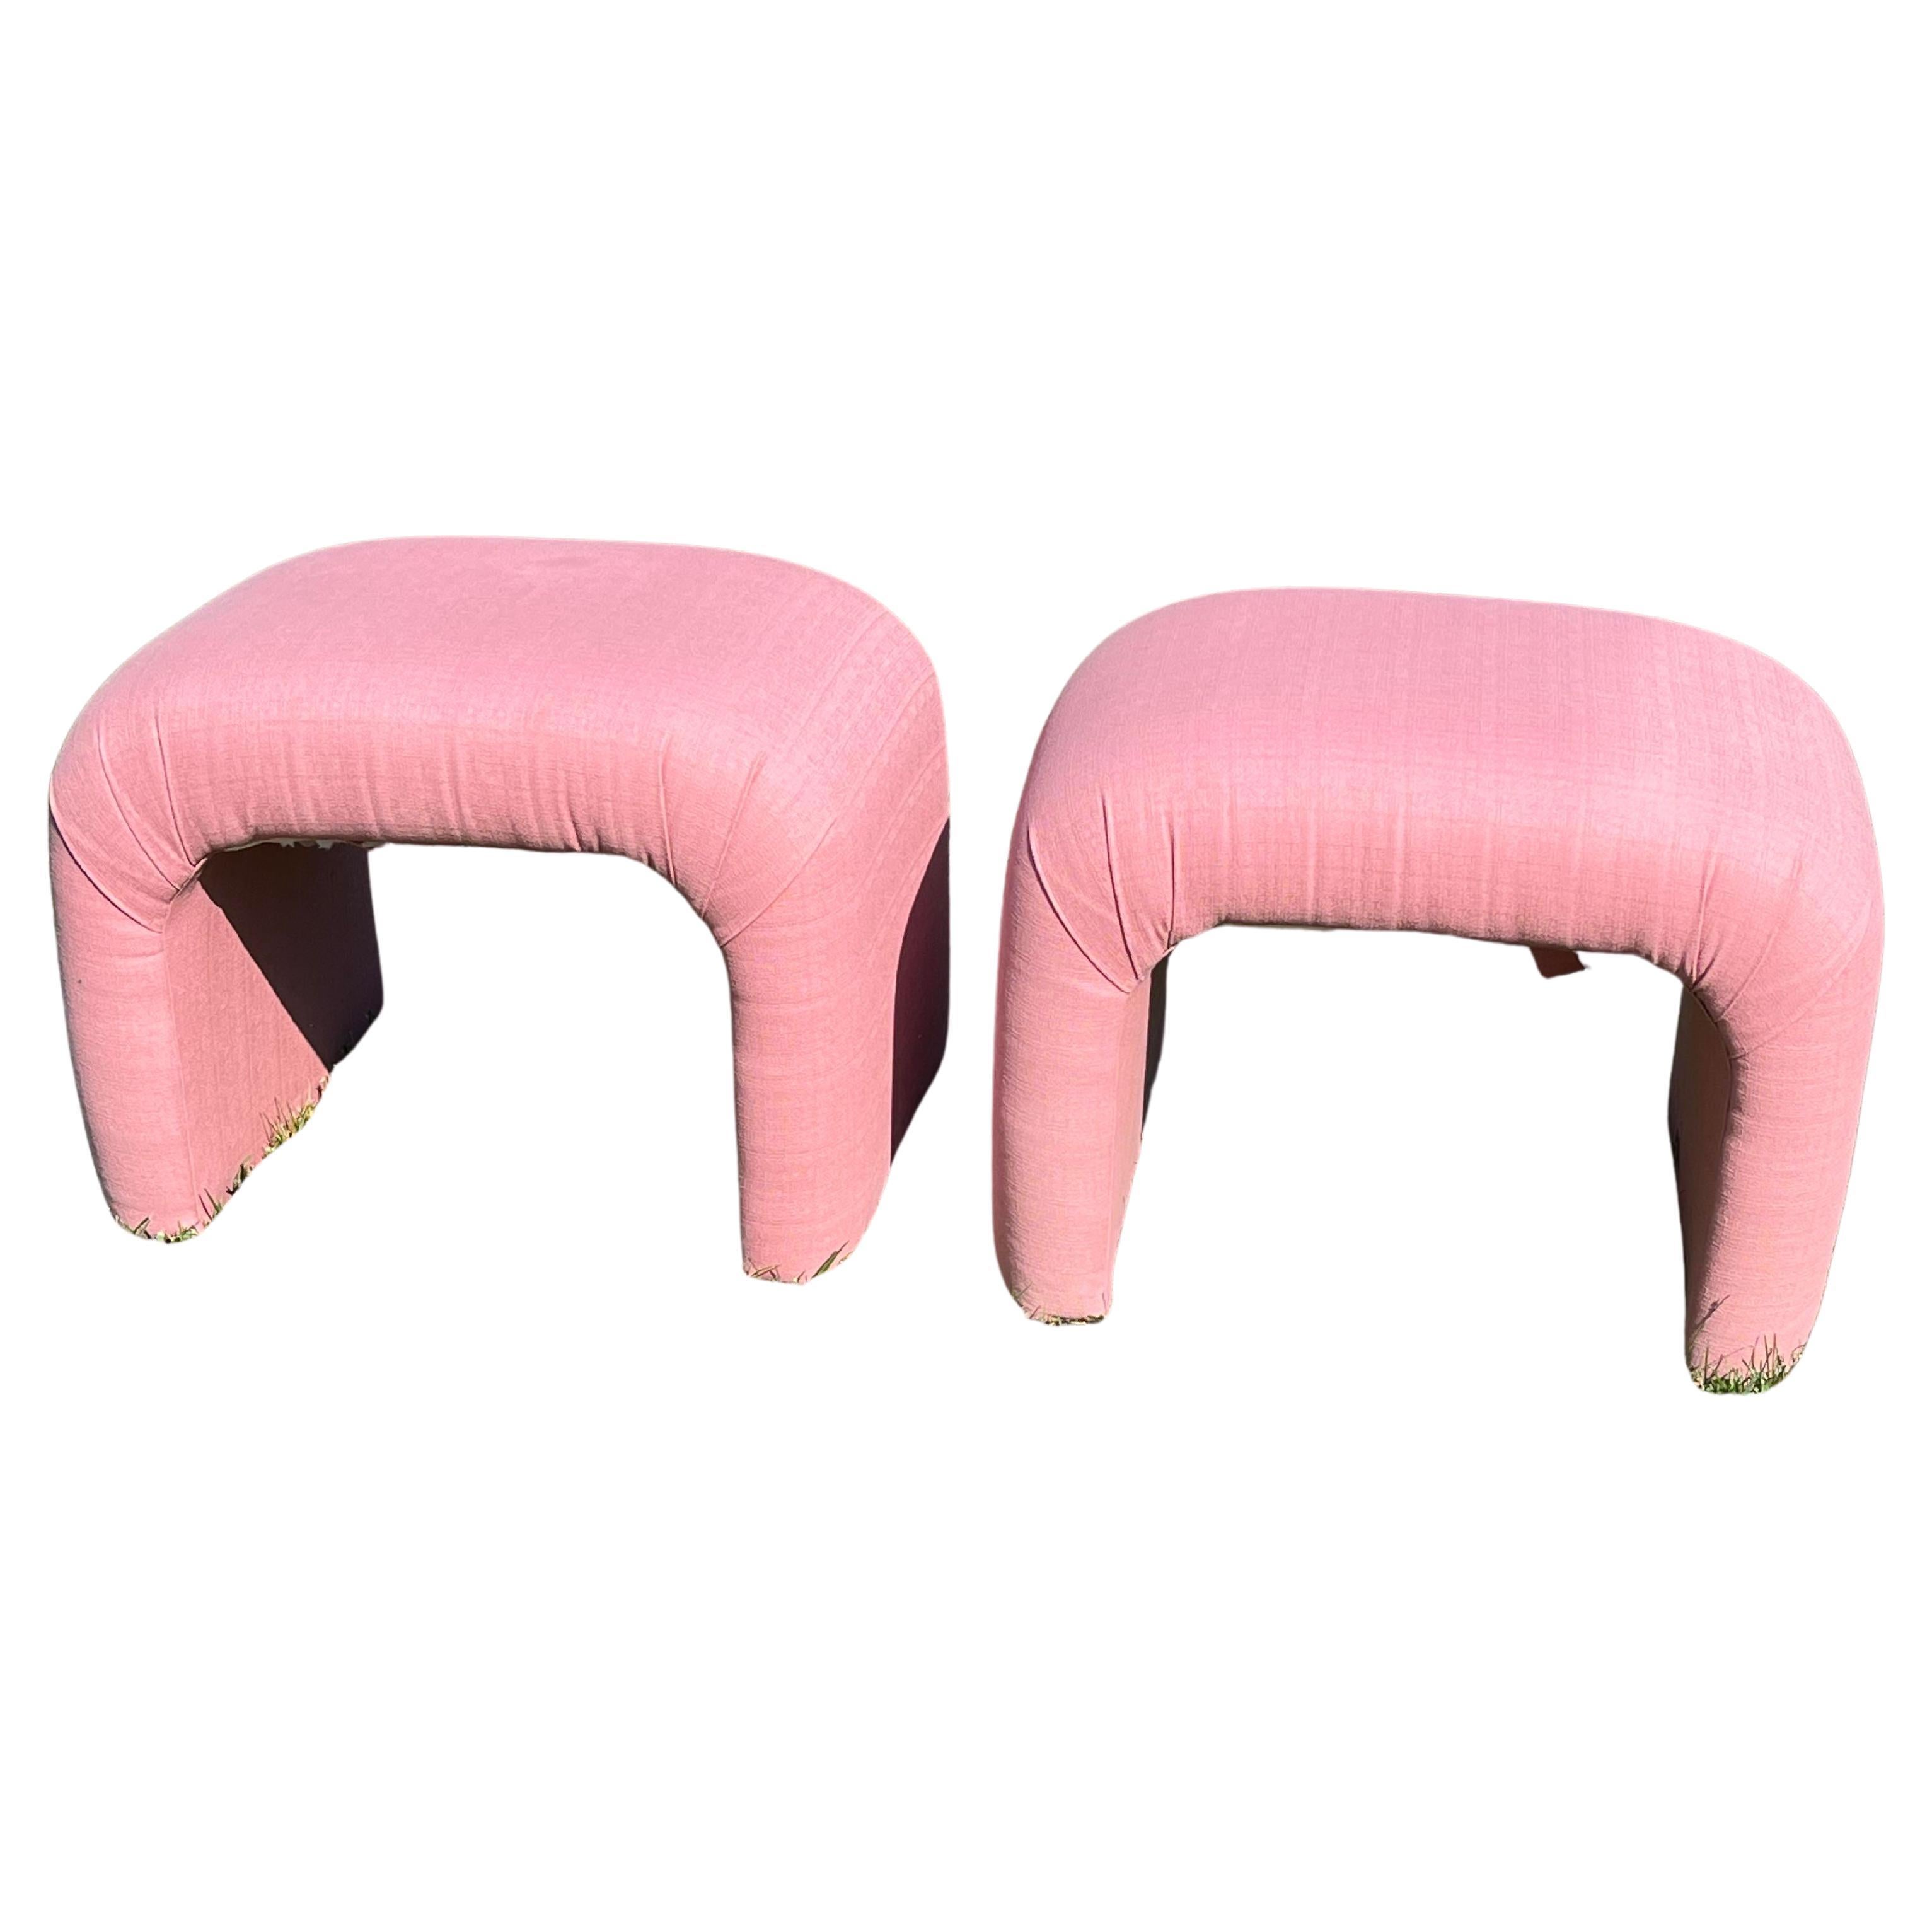 Postmodern Pink Waterfall Stools - a Pair For Sale